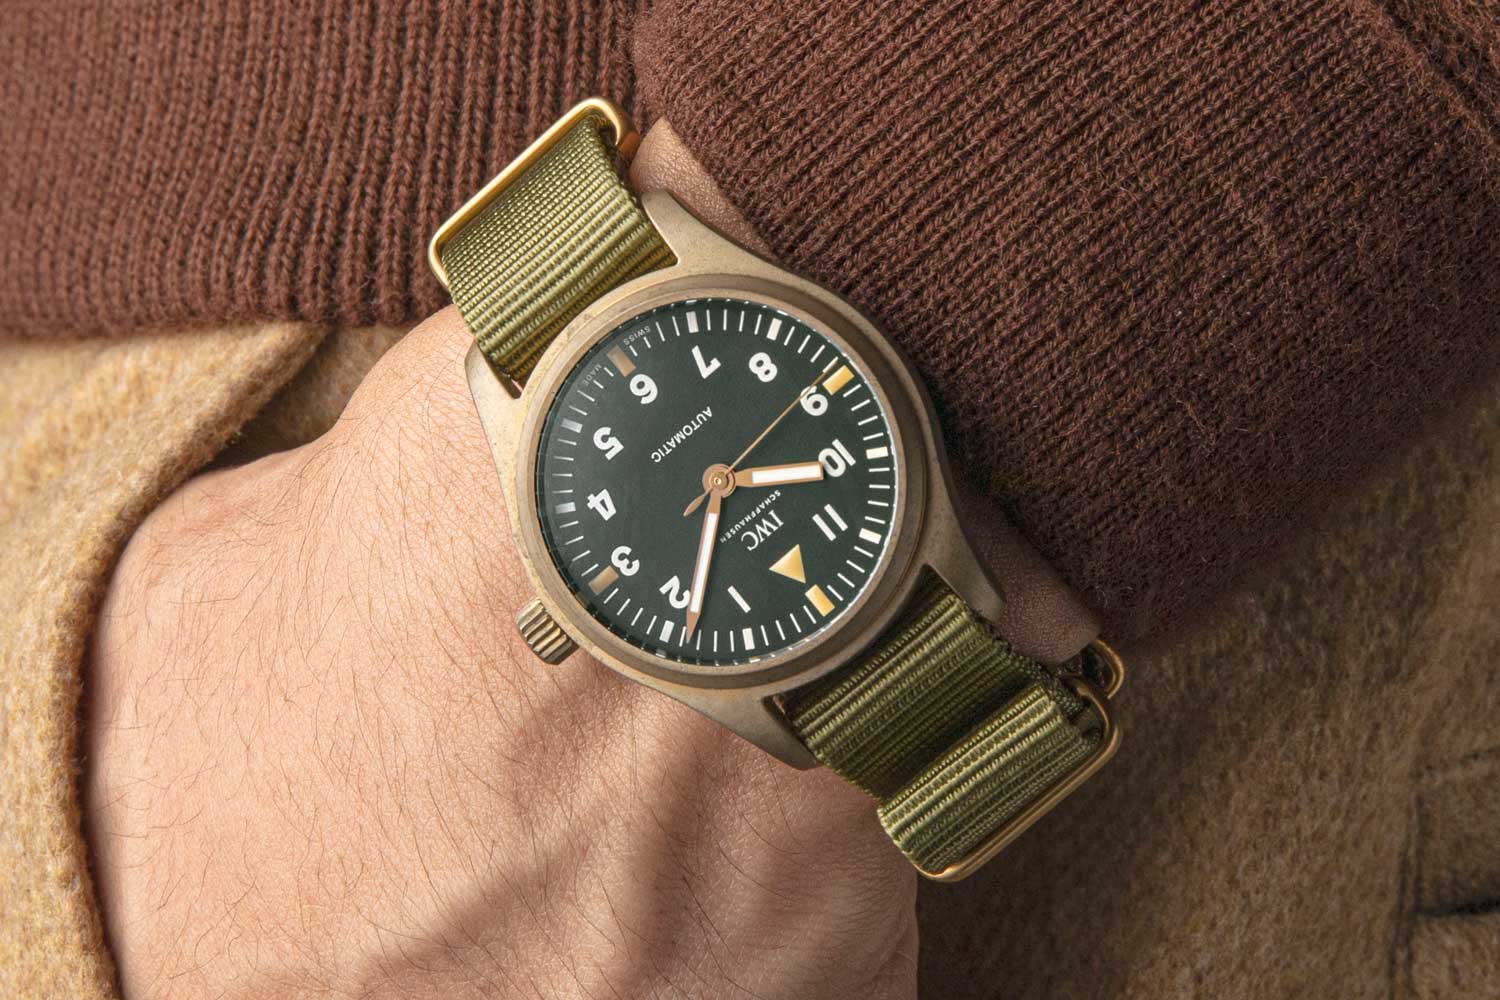 This special edition developed by The Rake and Revolution with the brand evokes the utilitarian purity of the Mark 11 updated with a new colour palette never seen before in the Pilot's collection till now.